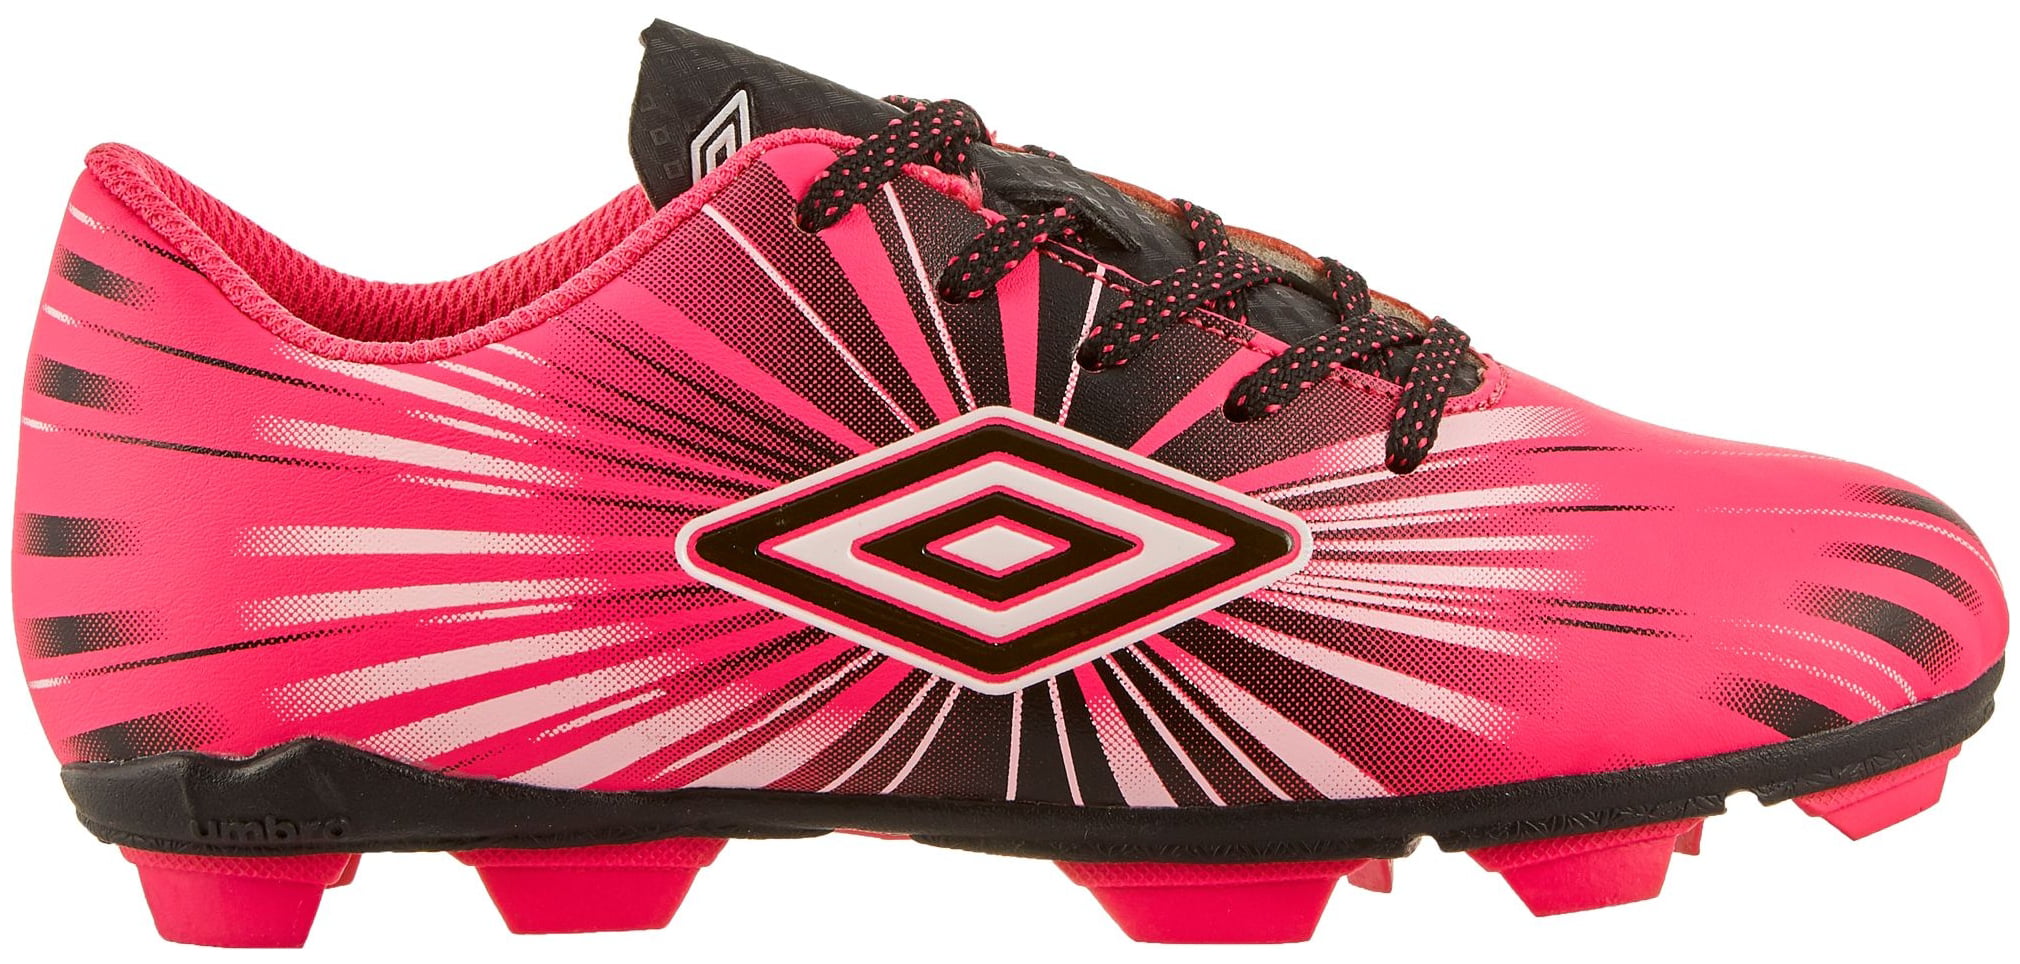 Girls Pink Soccer Cleats Umbro Arturo 2.0 New in Box 